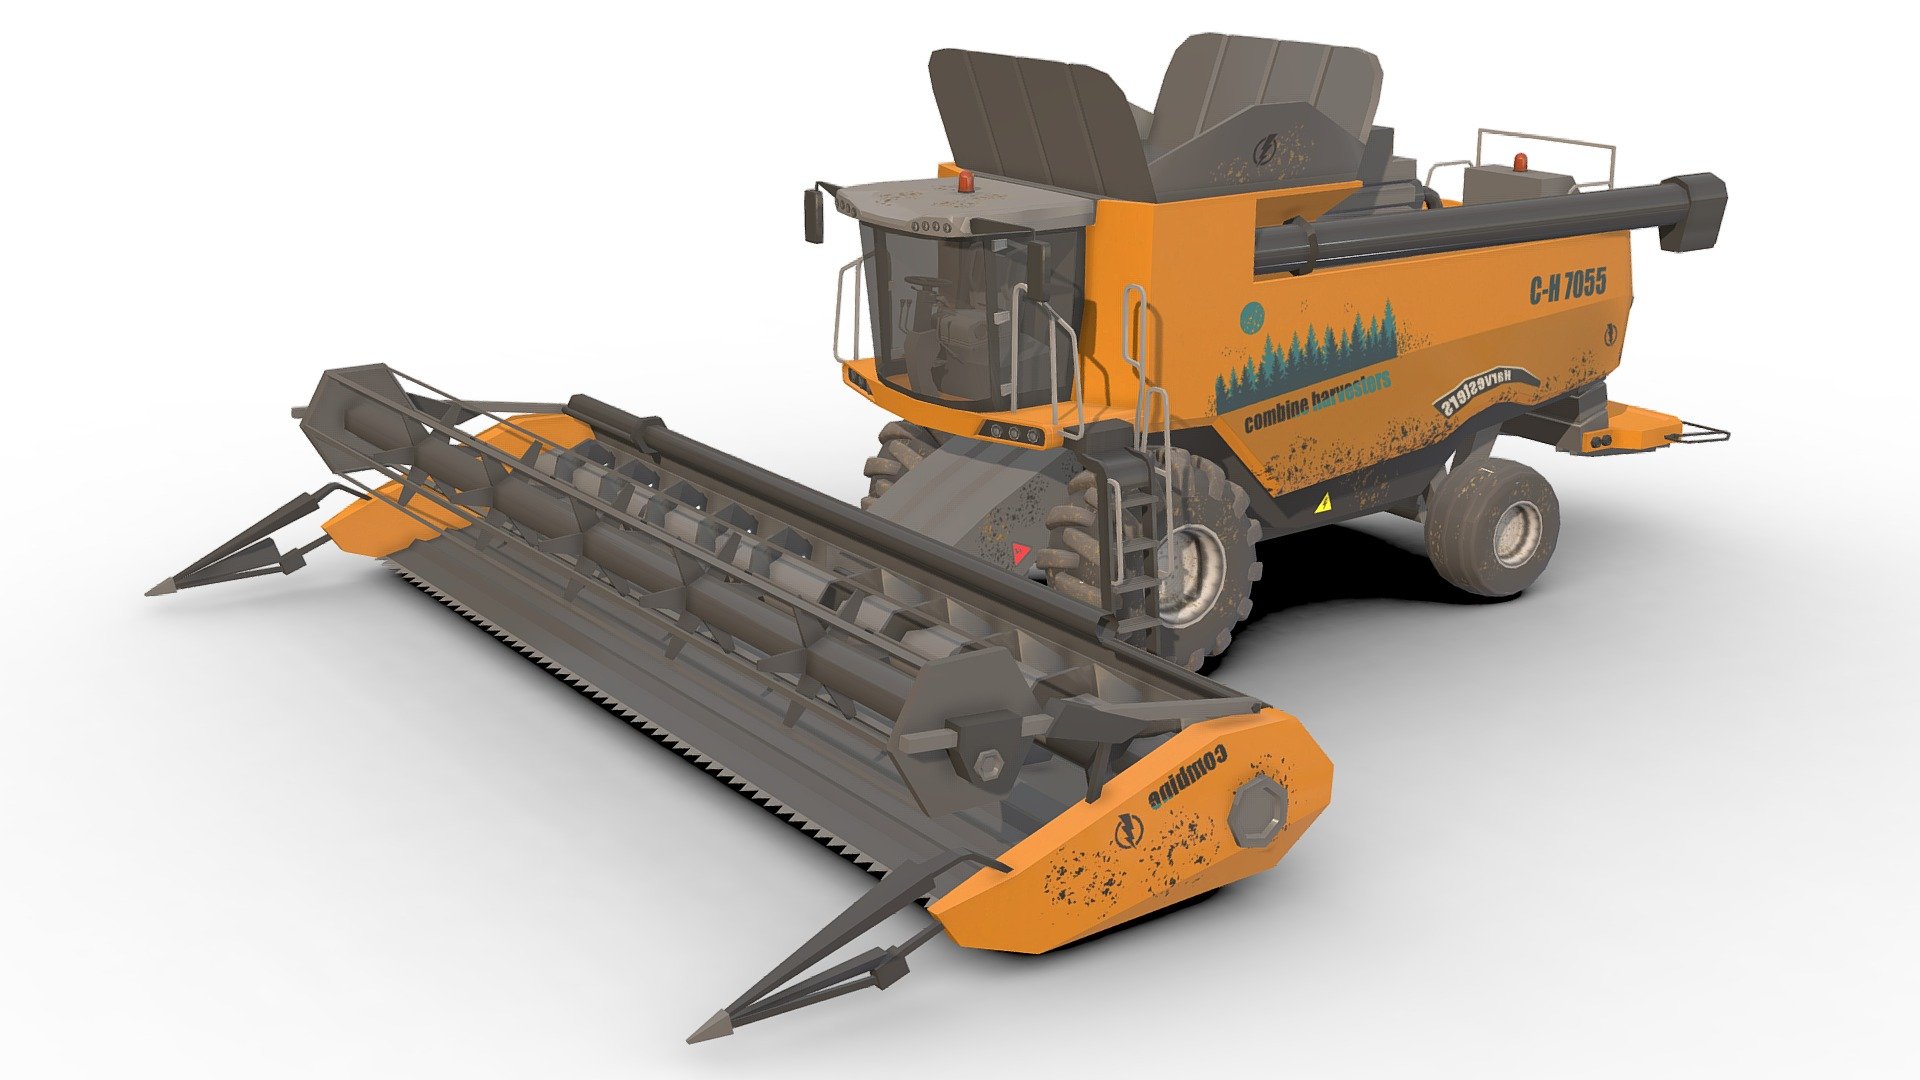 Combine truck .

You can use these models in any game and project.

This model is made with order and precision.

Separated parts (bodys. wheels.Steer).

Very Low- Poly.

Truck have separate parts.

Average poly count: 19,000 tris.

Texture size: 2048 / 1024 (PNG).

Number of textures: 2.

Number of materials: 3.

Format: Fbx / Obj / 3DMax .

Wait for my new models.. Your friend (Sidra) 3d model